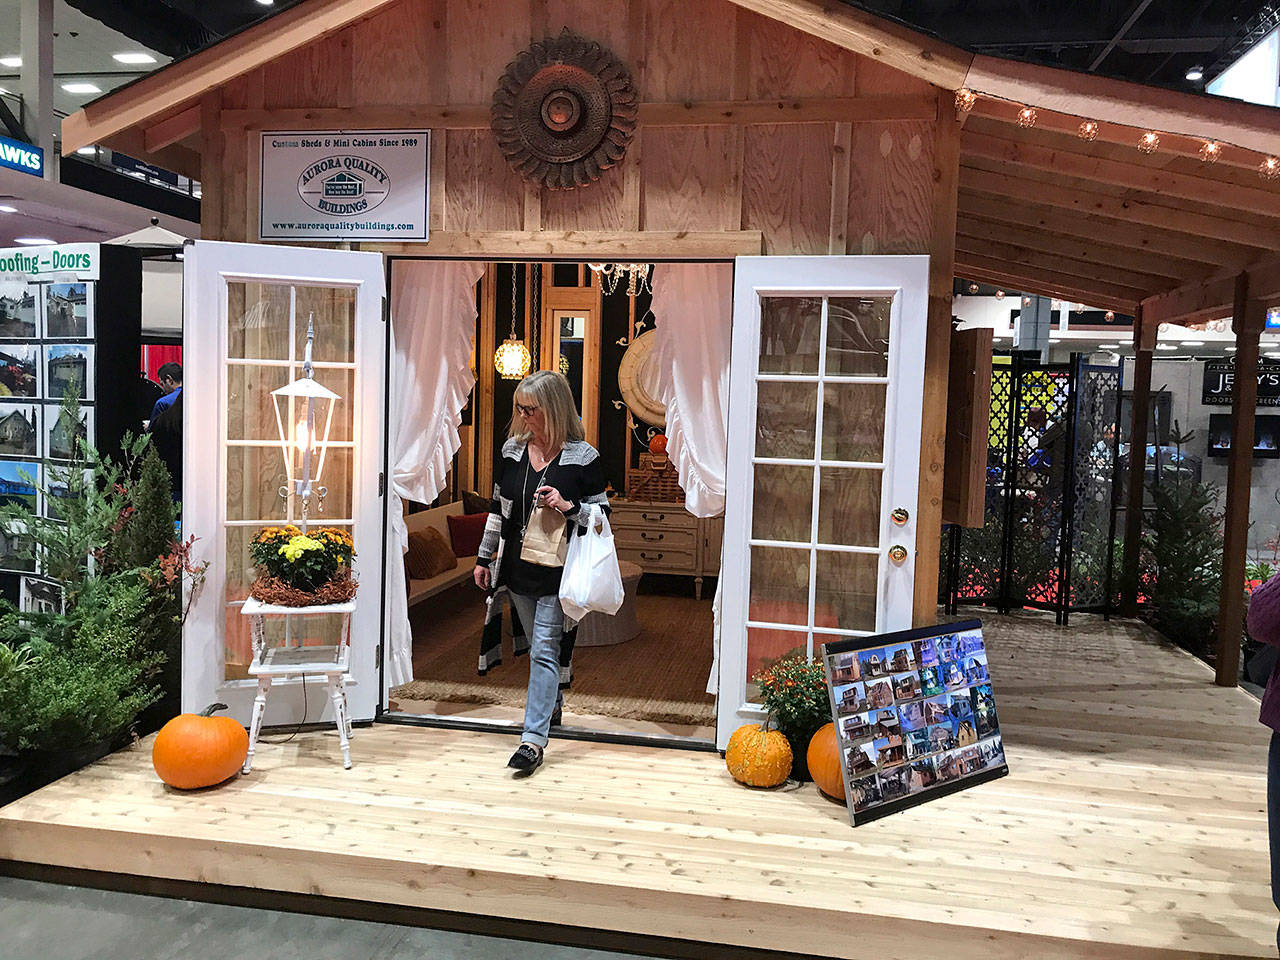 Aurora Quality Buildings, of Marysville, will display a “She Shed,” a woman’s version of a “man cave” for the back yard. (Seattle Home Show)